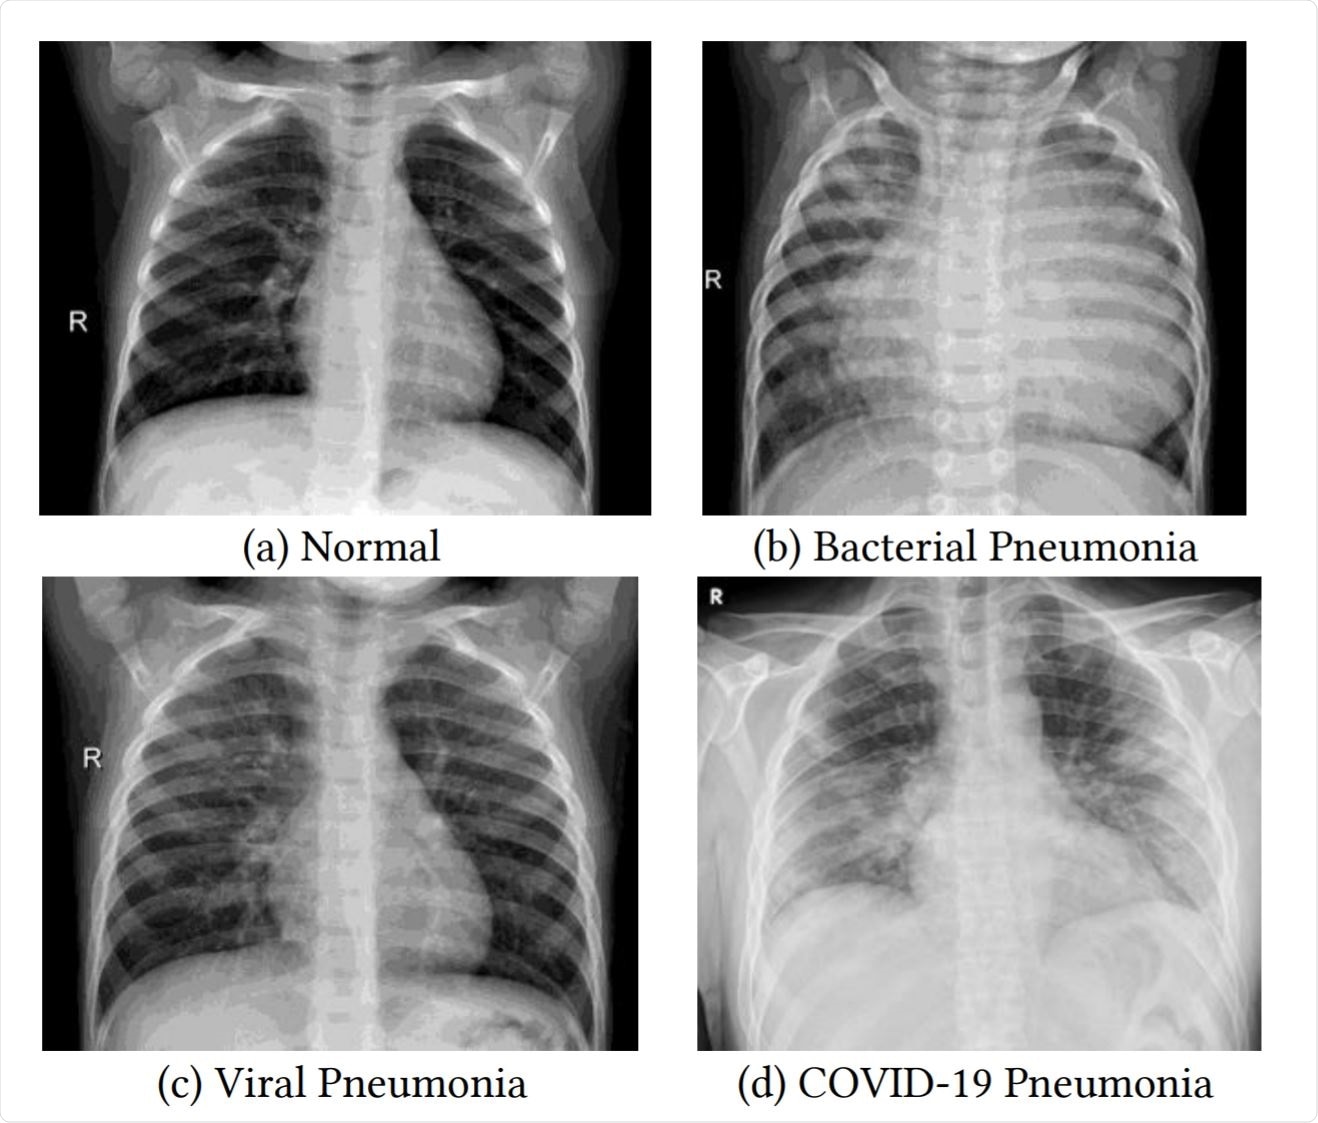 Examples of frontal-view chest X-Ray images from the datasets.